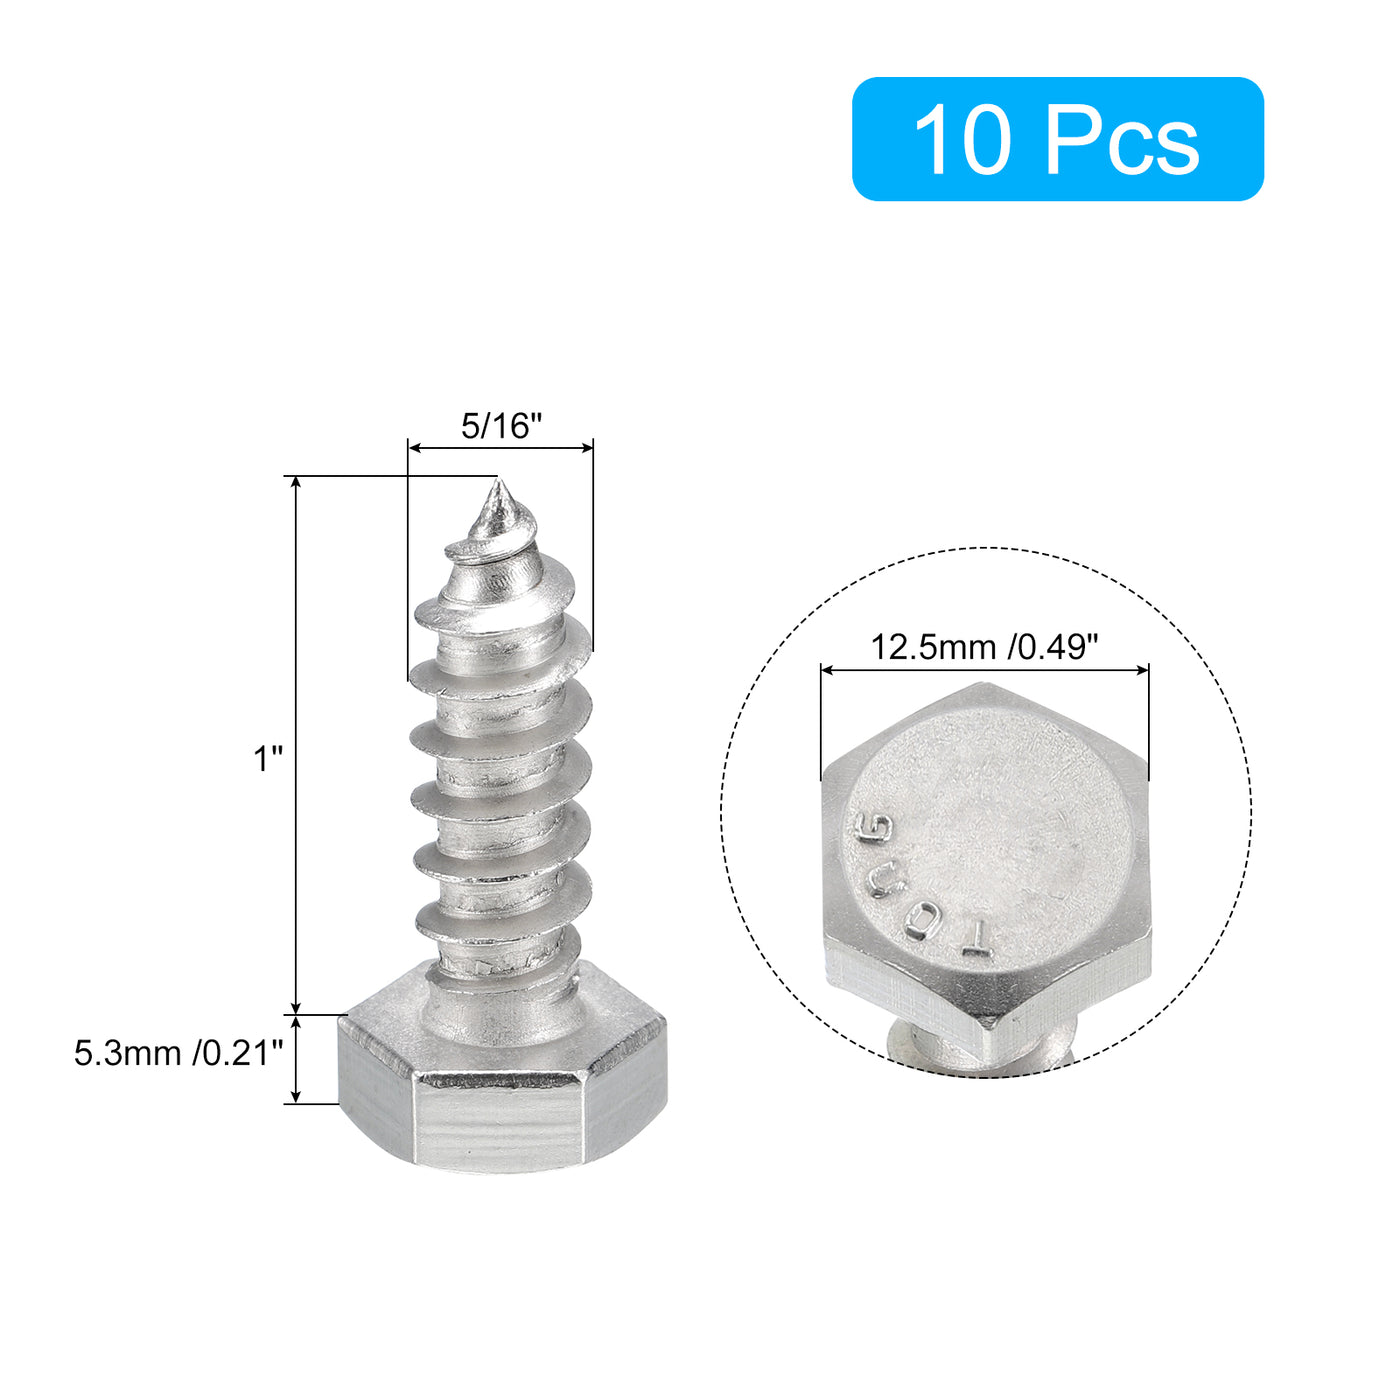 uxcell Uxcell Hex Head Lag Screws Bolts, 10pcs 5/16" x 1" 304 Stainless Steel Wood Screws